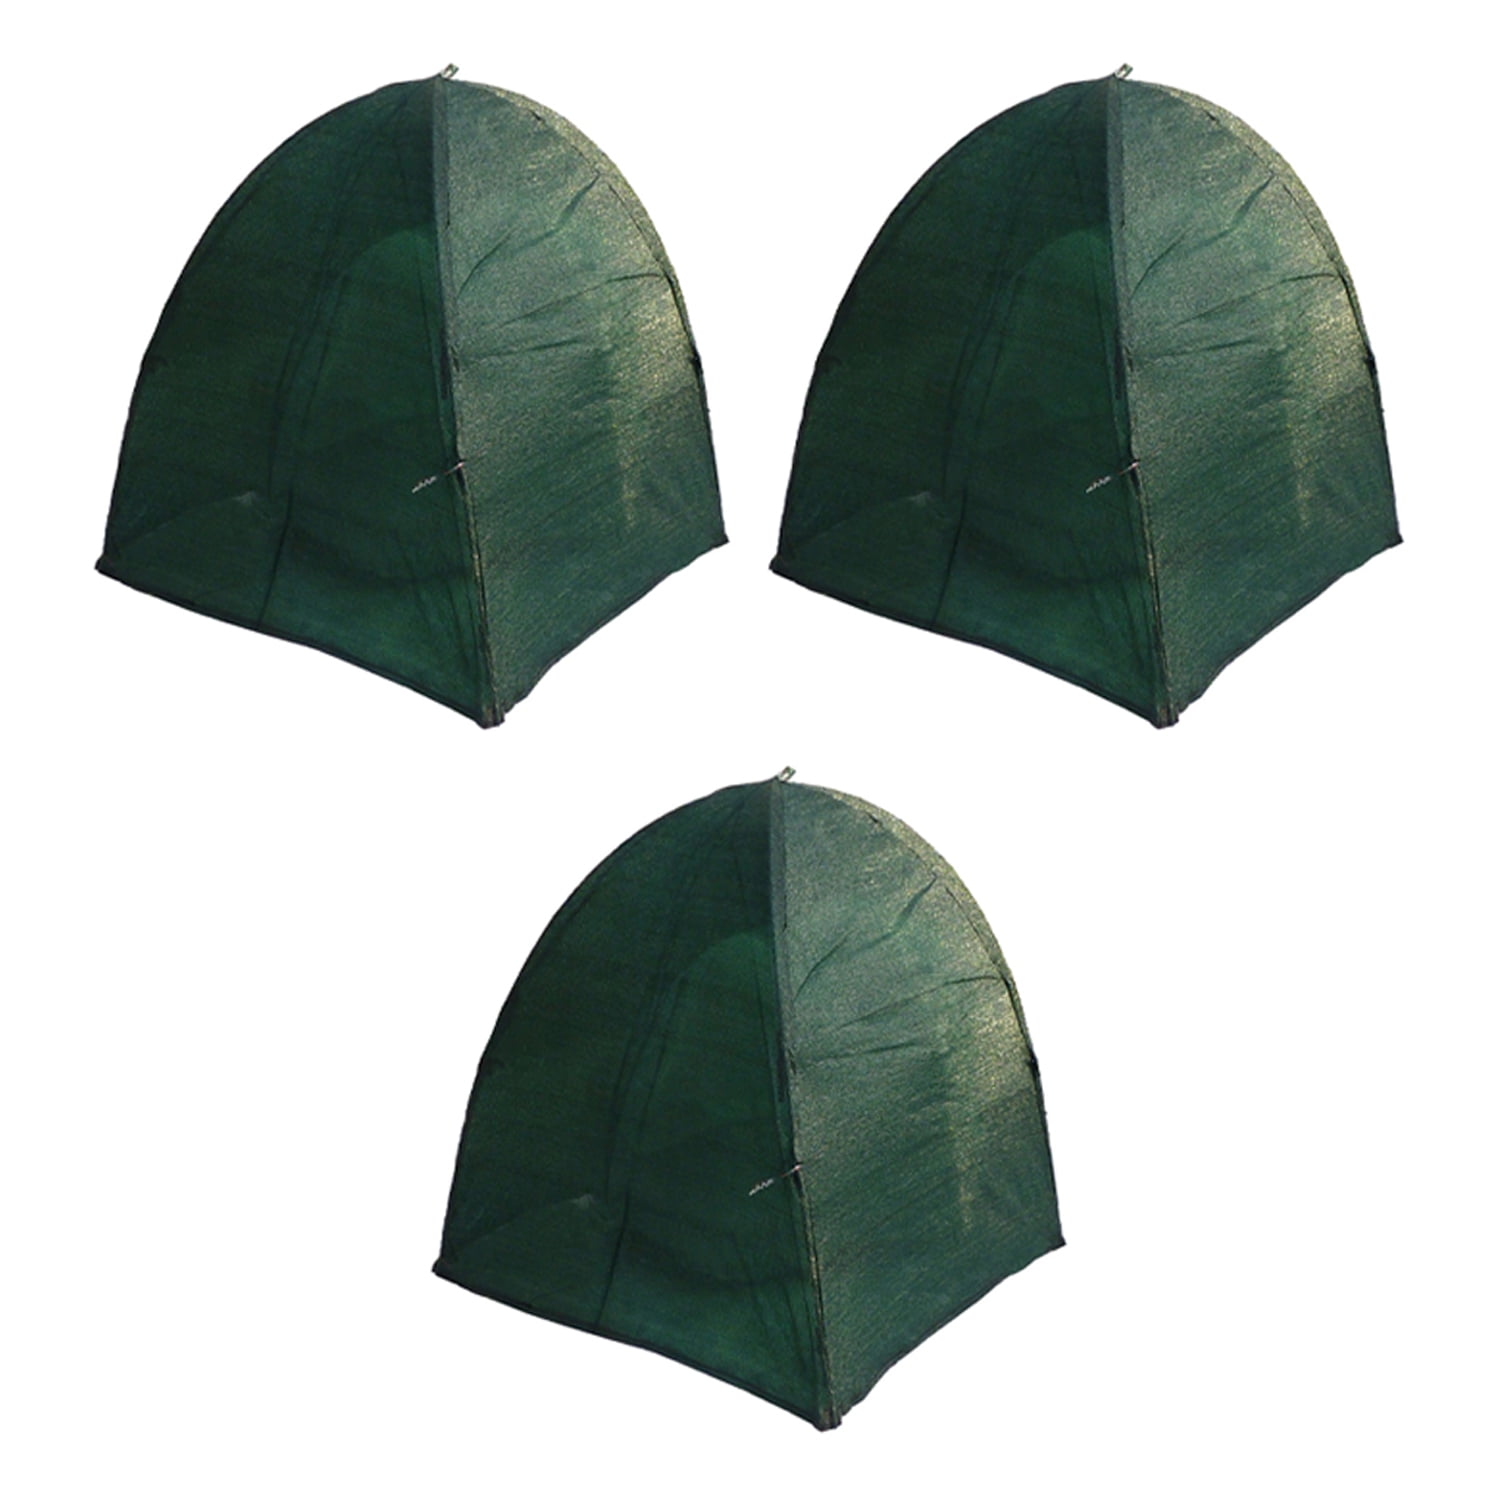 Details about   NuVue GEN II 40-Inch Synthetic Framed Winter Shrub Frost Cover 3 Pack Green 